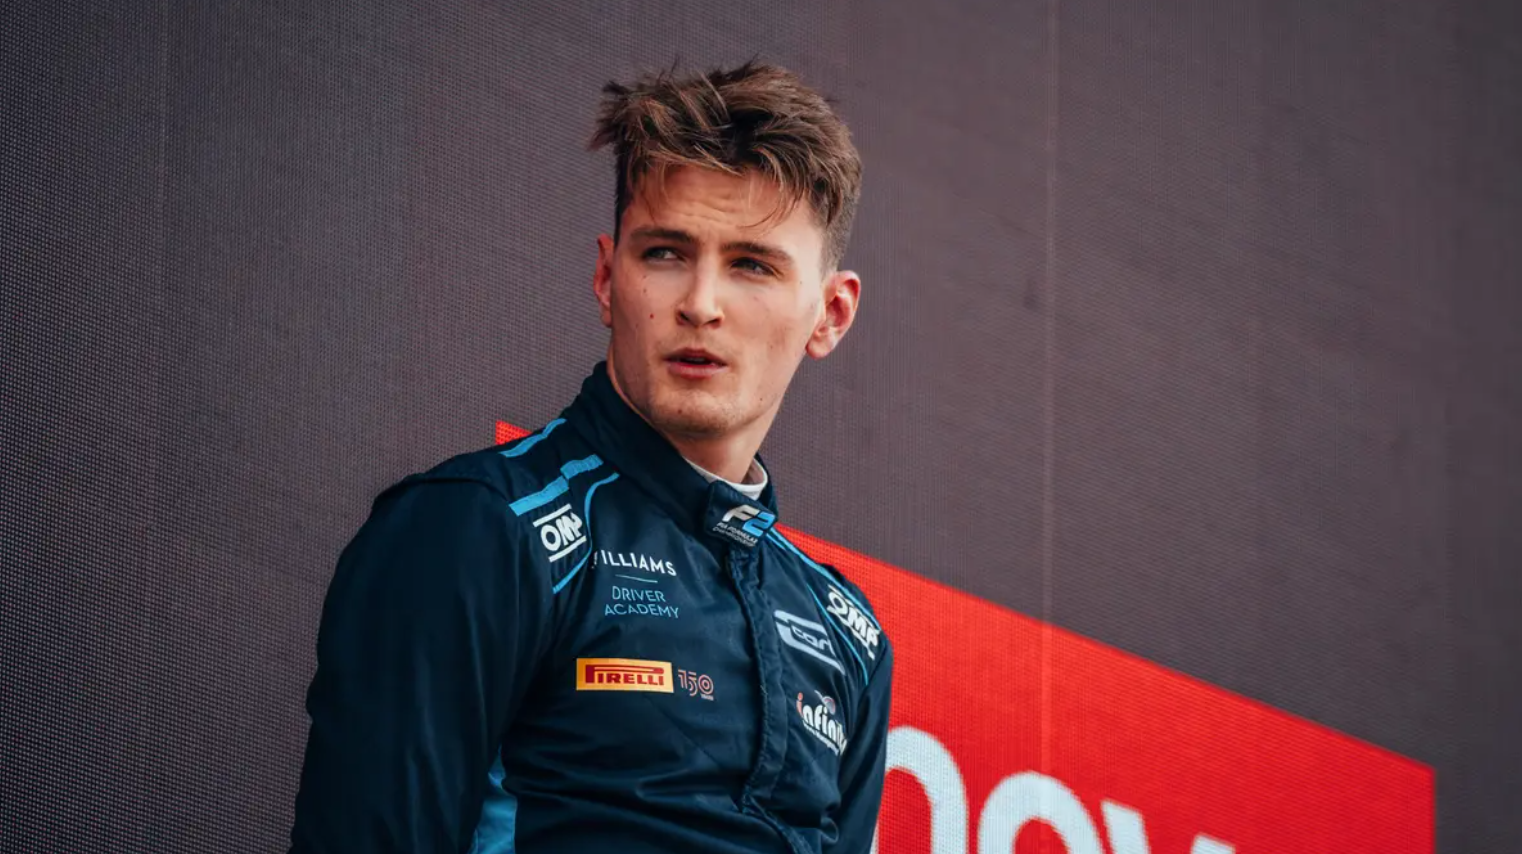 F2 driver Logan Sargeant announced as Williams second driver for F1 2023 pending a super license. (Credit: WilliamsF1.com)